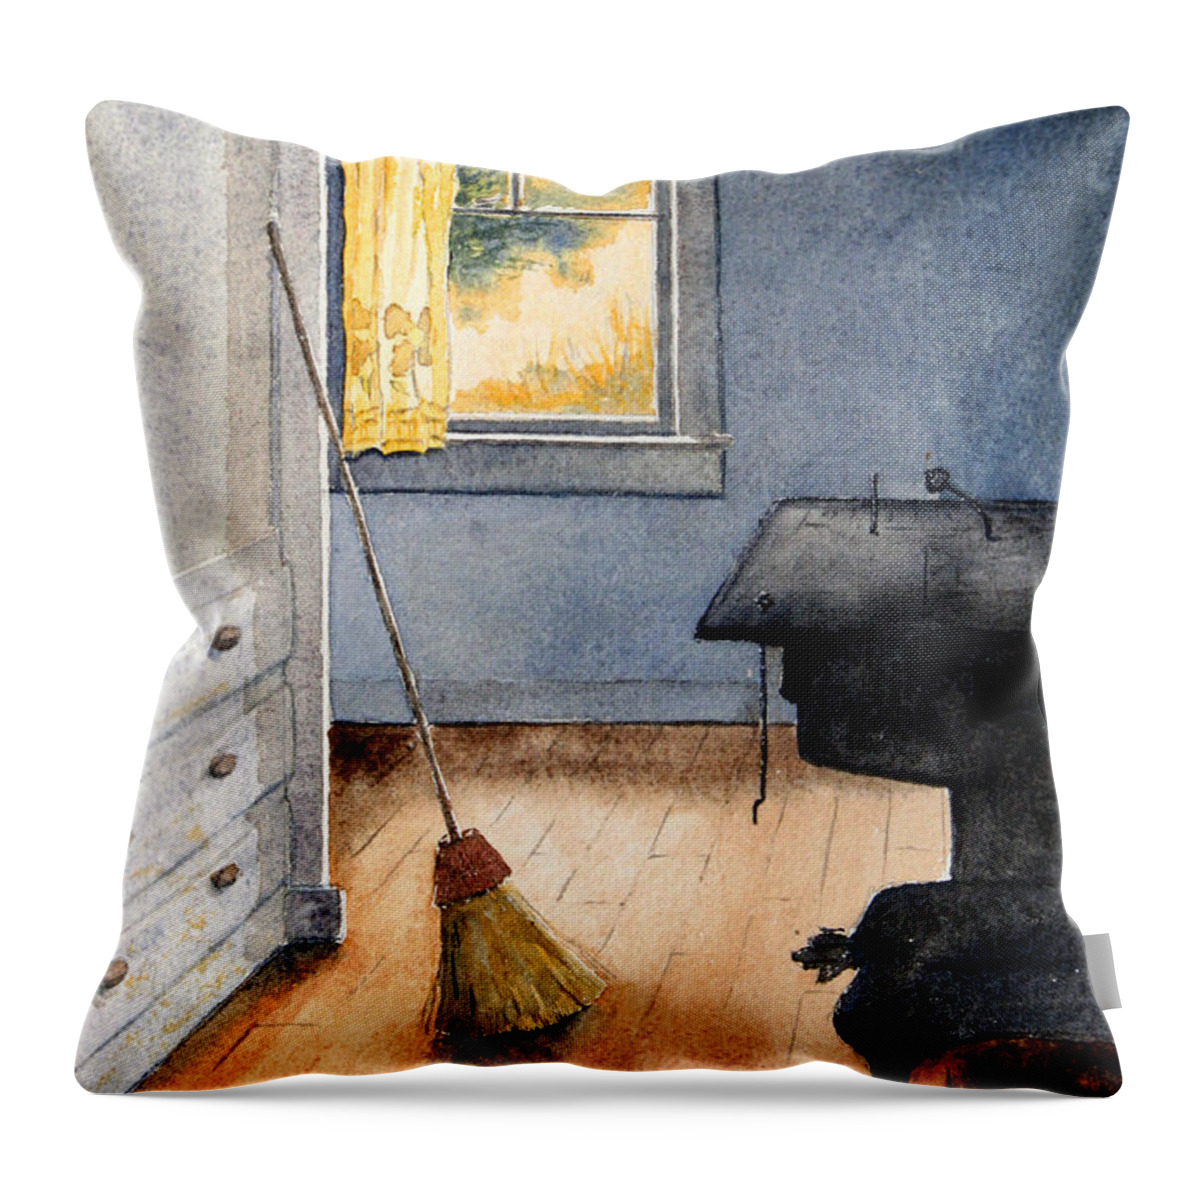 Stove Throw Pillow featuring the painting Monhegan Kitchen by Roger Rockefeller